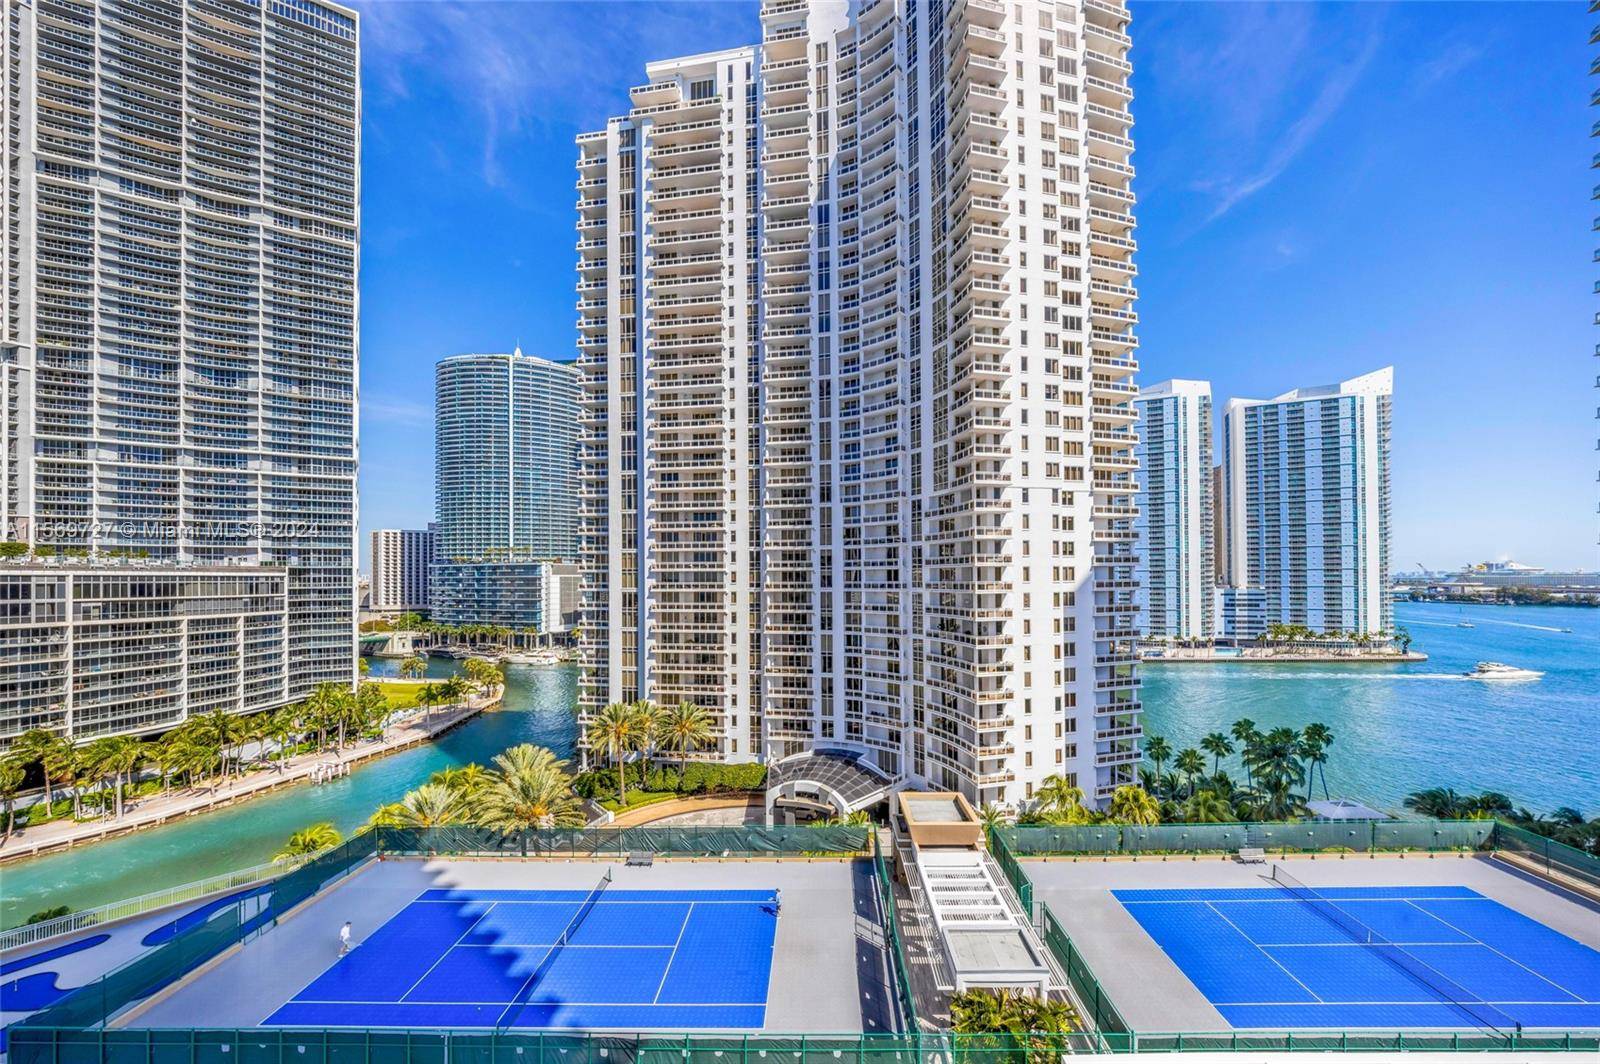 Impeccably renovated apartment situated in The Courts at Brickell Key.